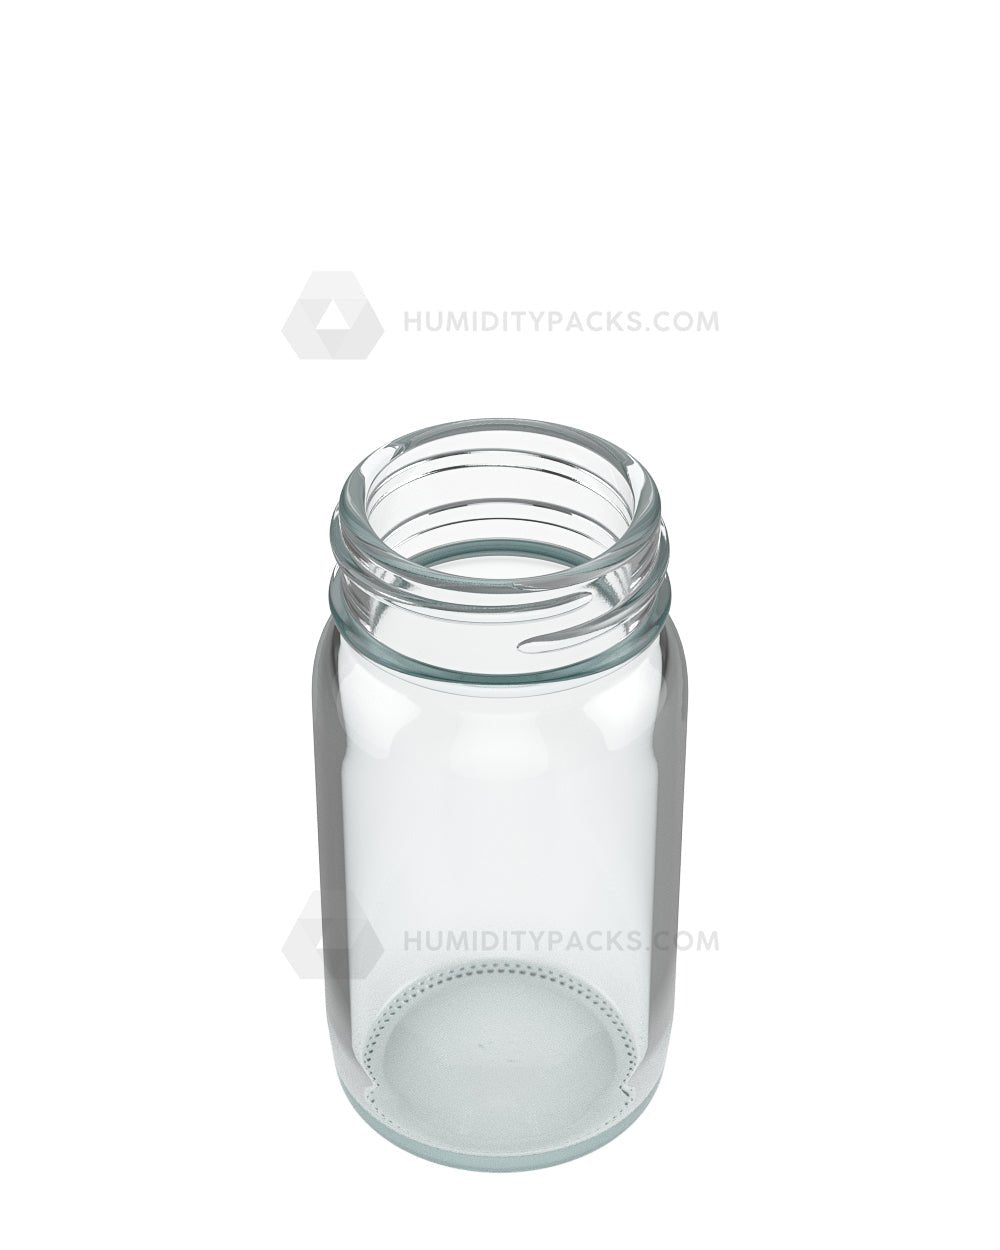 38mm Wide Mouth Straight Clear 2oz Glass Jar 160/Box Humidity Packs - 2